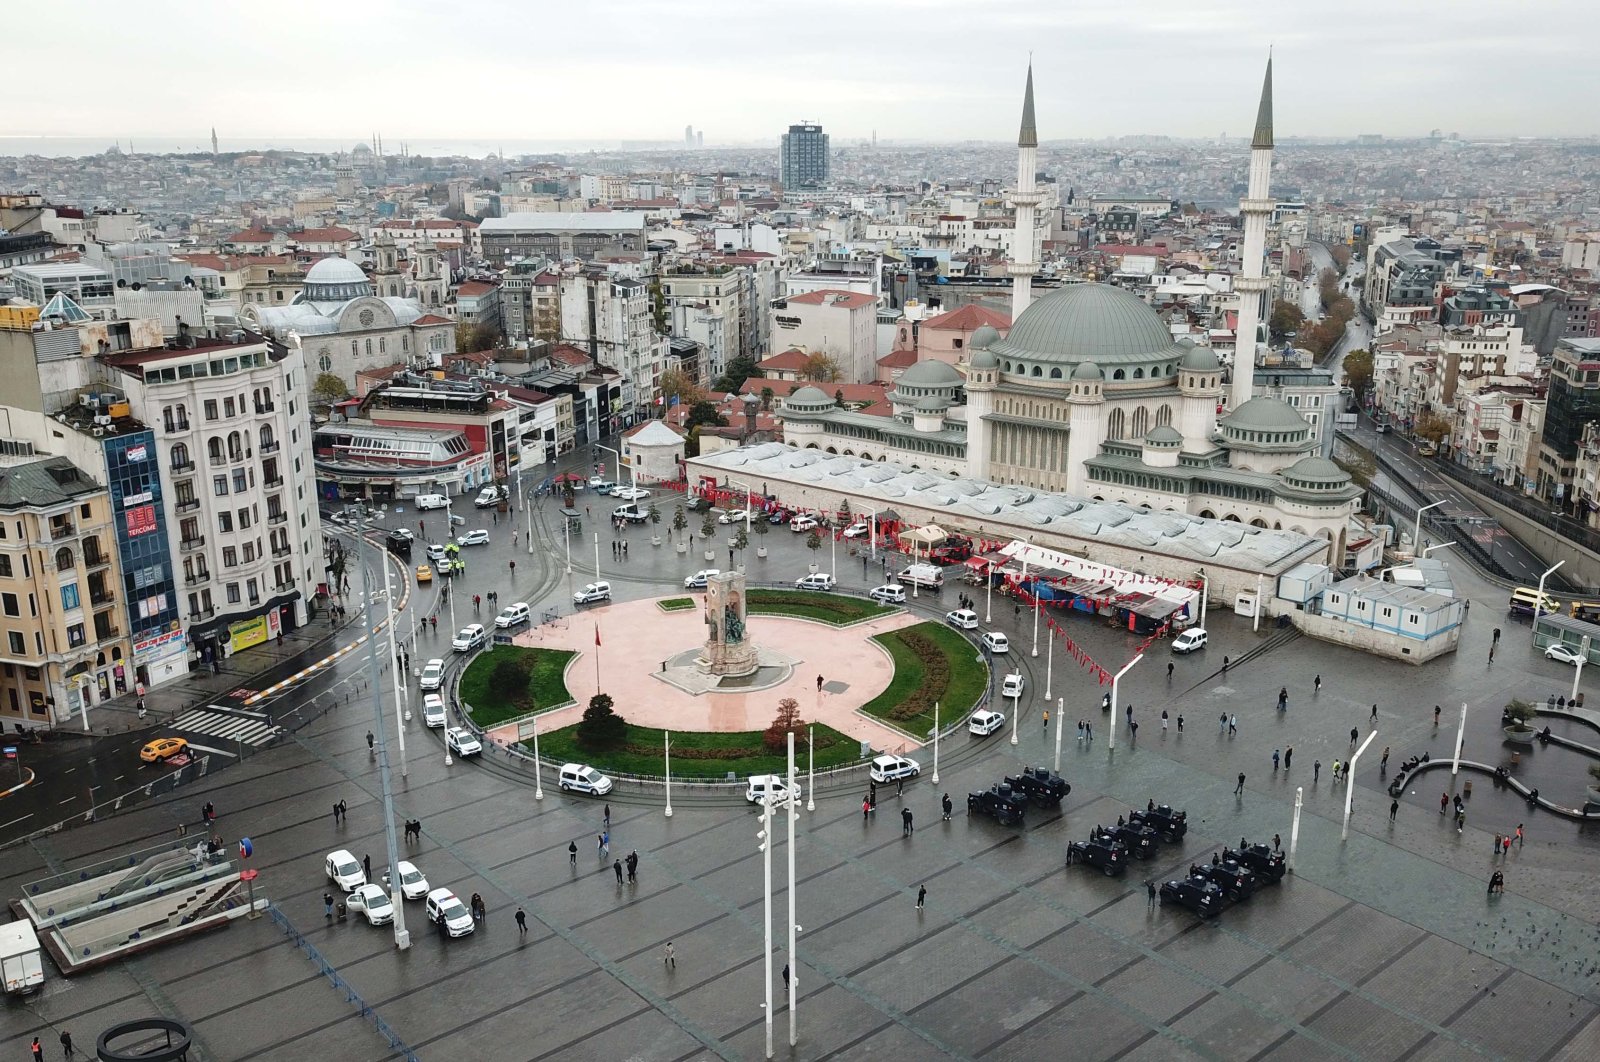 Istanbul's Taksim Square is seen during the filming of a promotional video for the police forces on Dec. 13, 2020 (DHA Photo)